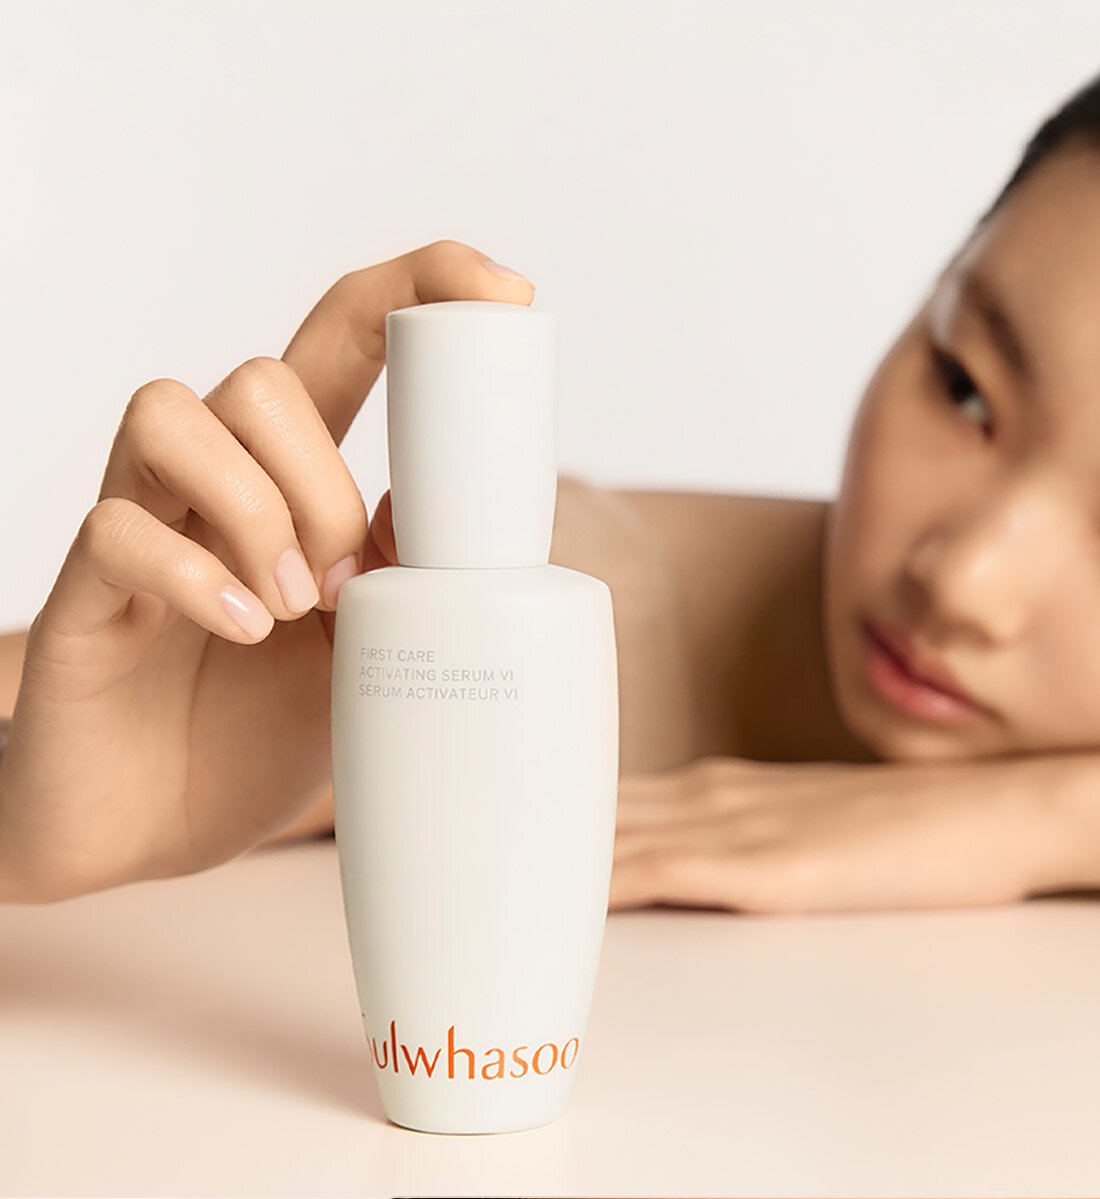 A newly design Sulwhasoo First Care Activating Serum, awakens the regeneration of your skin, leaving a radiant skin and hydrated after each use